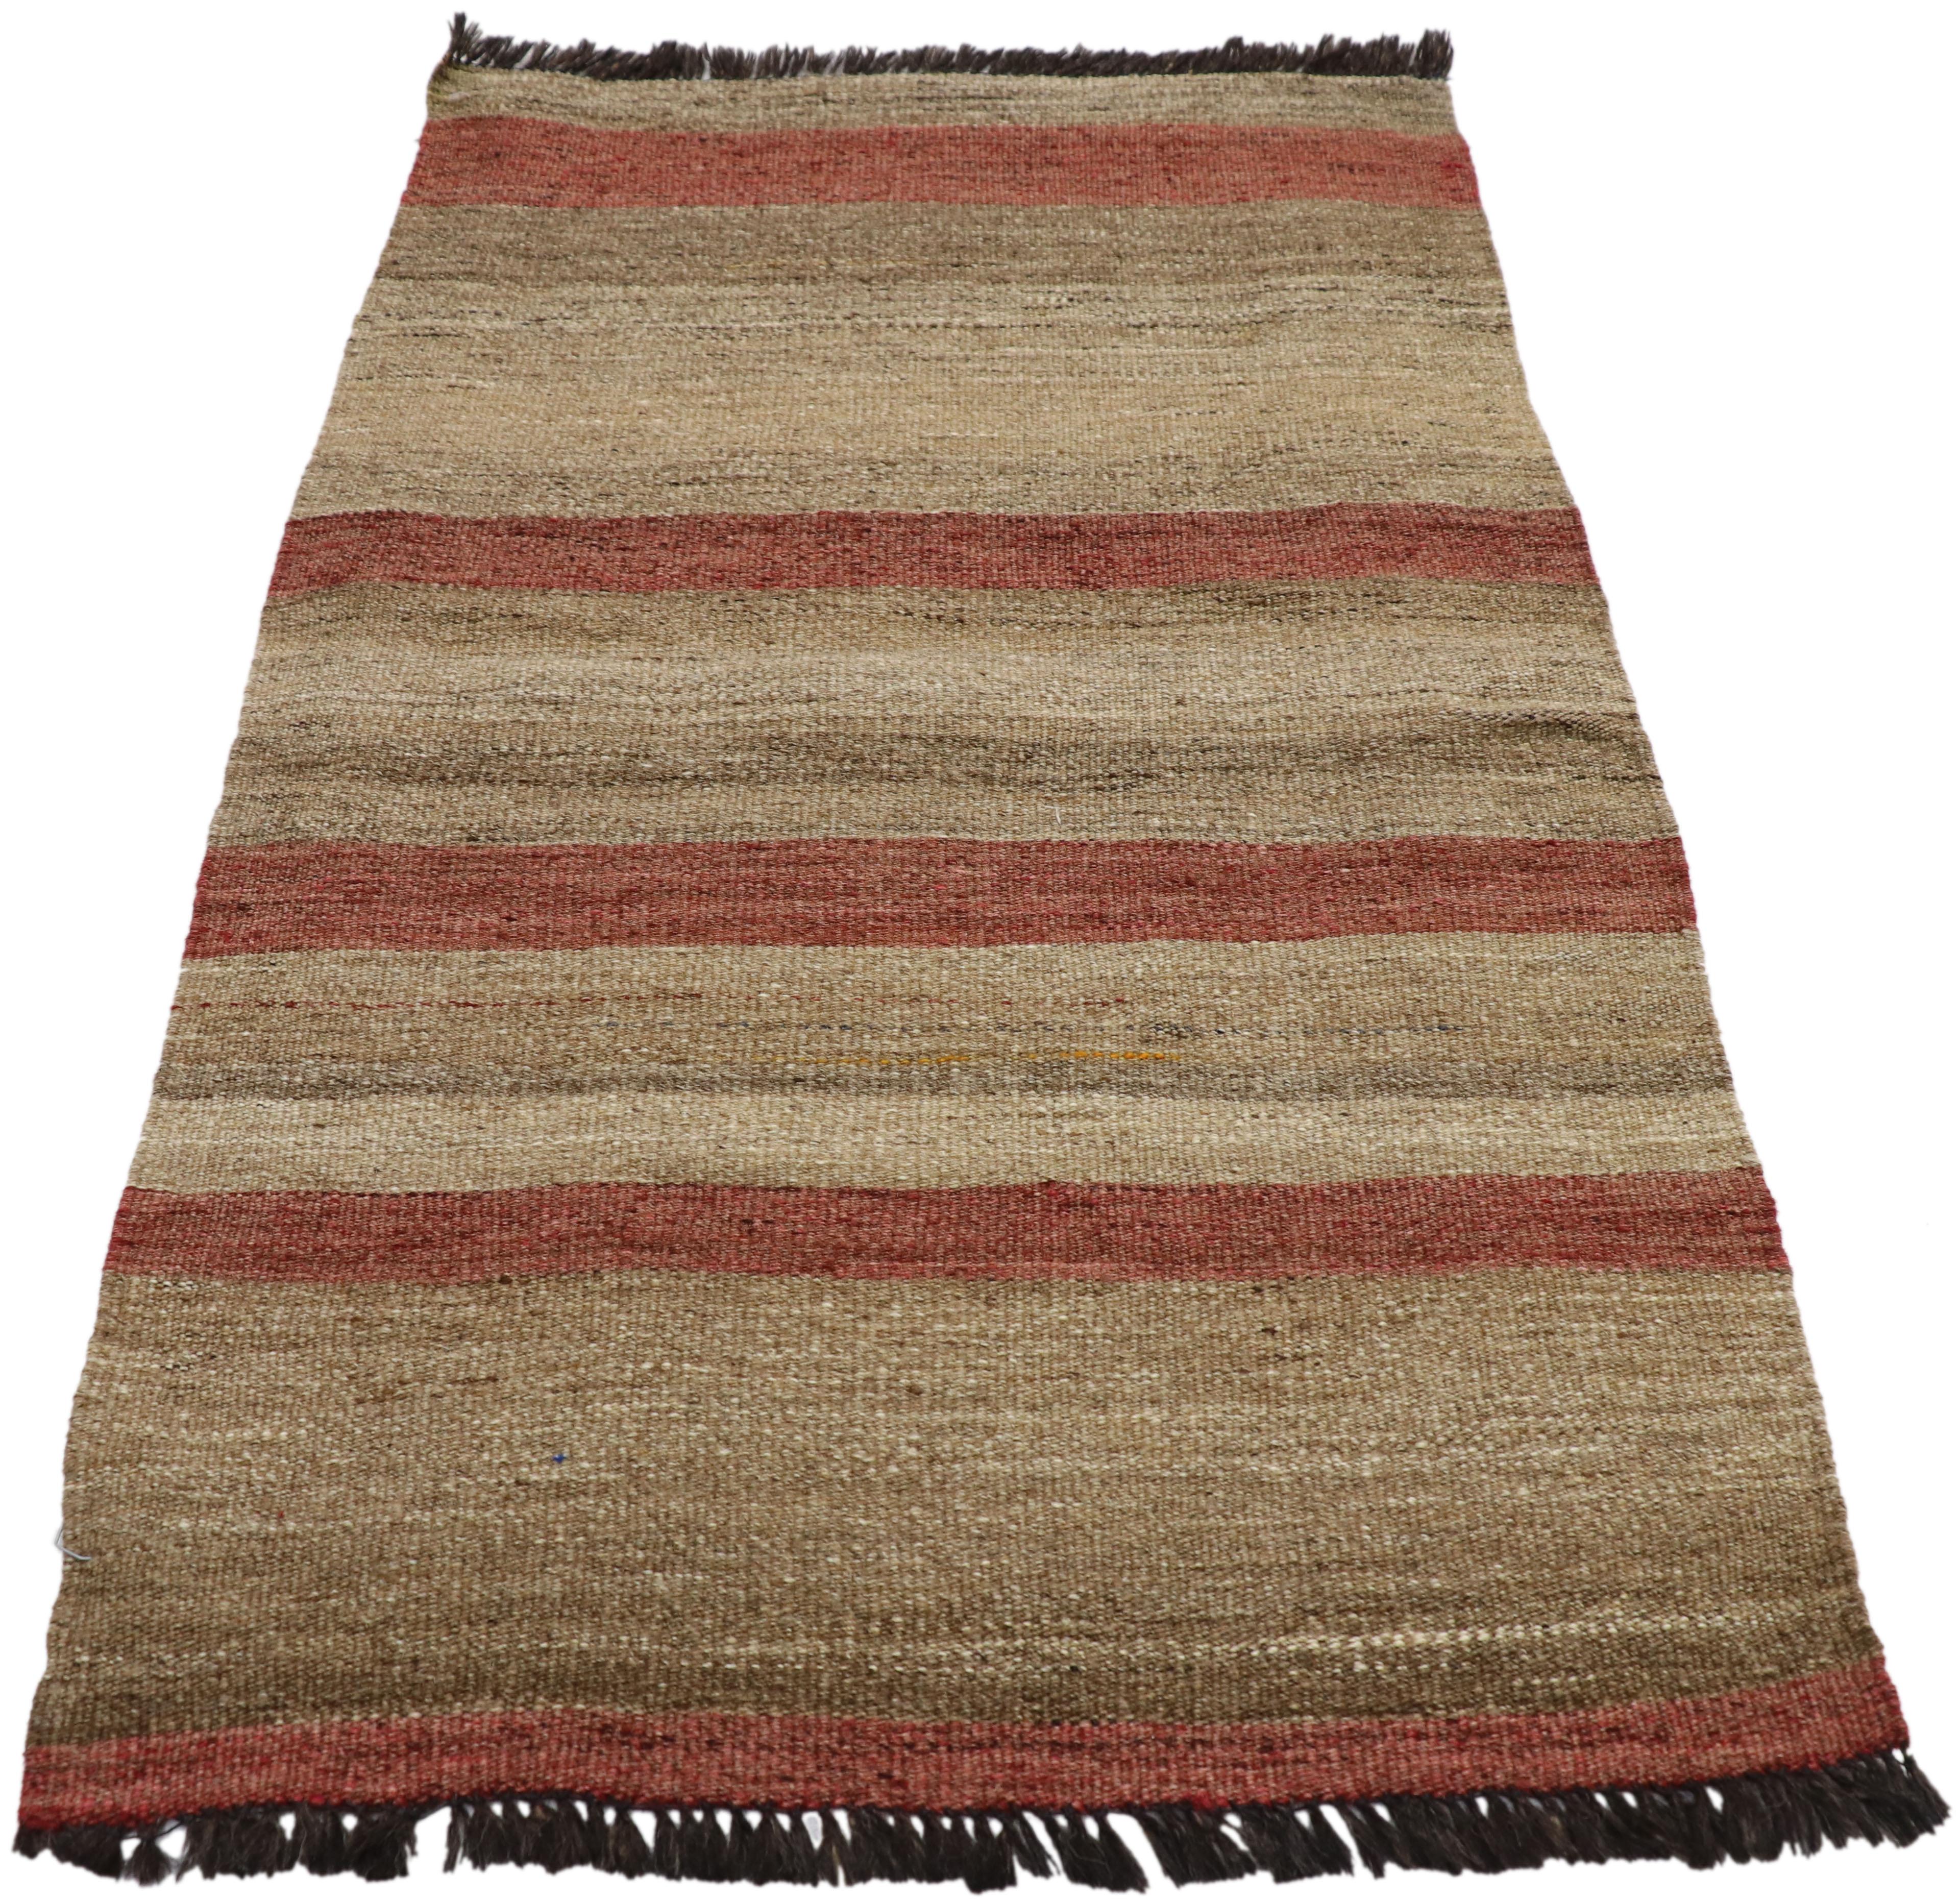 Hand-Woven Vintage Turkish Kilim Accent Rug with Earth Tone Colors, Small Flat-Weave Rug